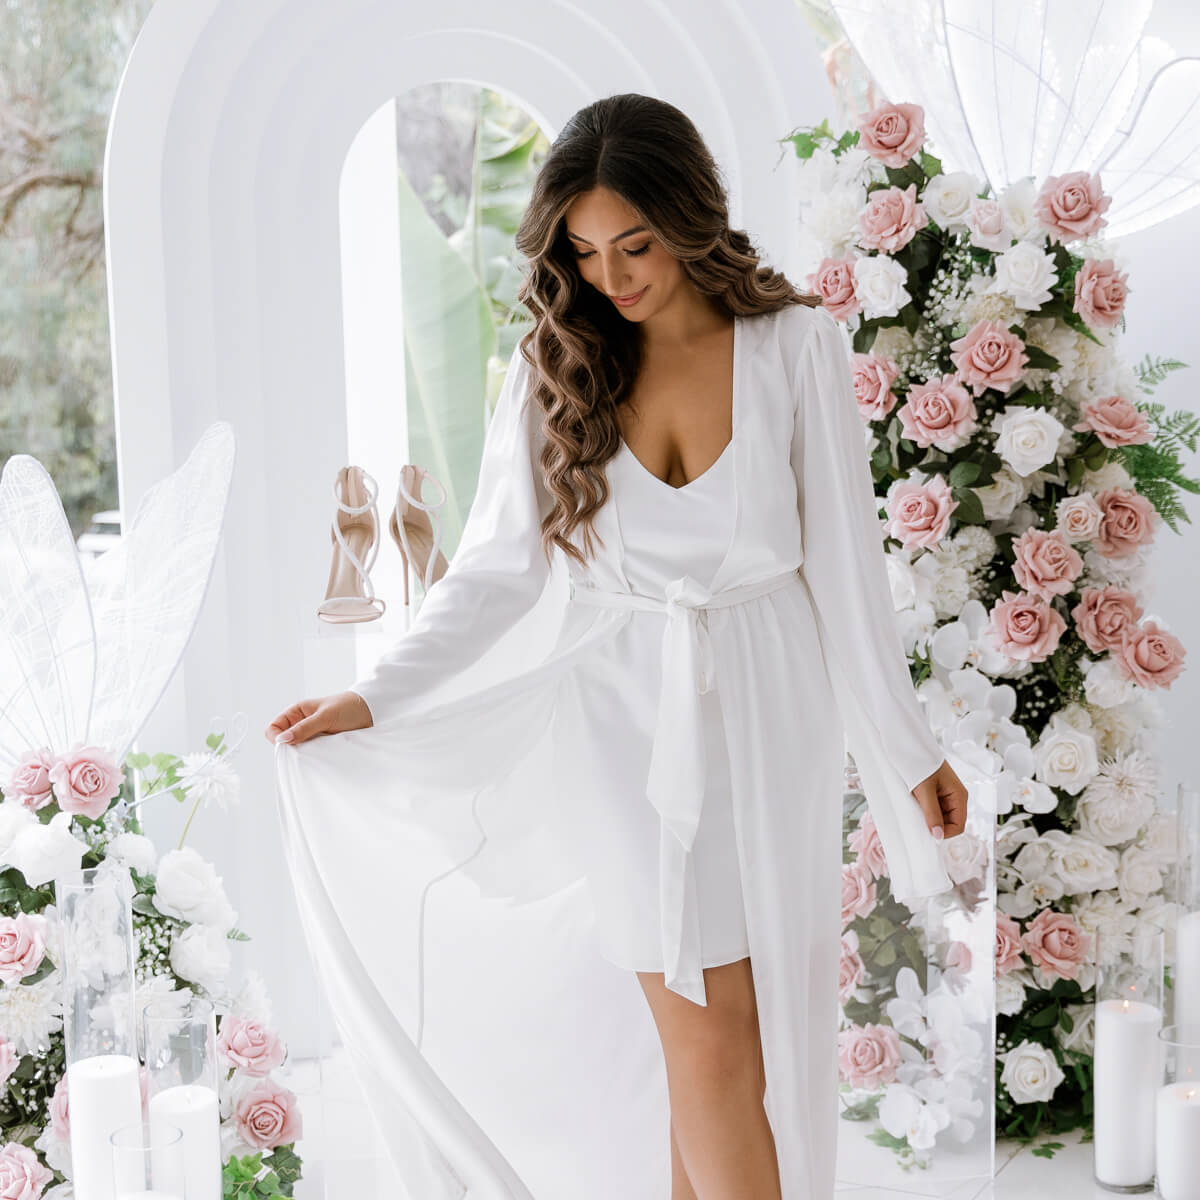 bride standing in front of white 3d arch backdrop and pink flower arrangements on wedding day